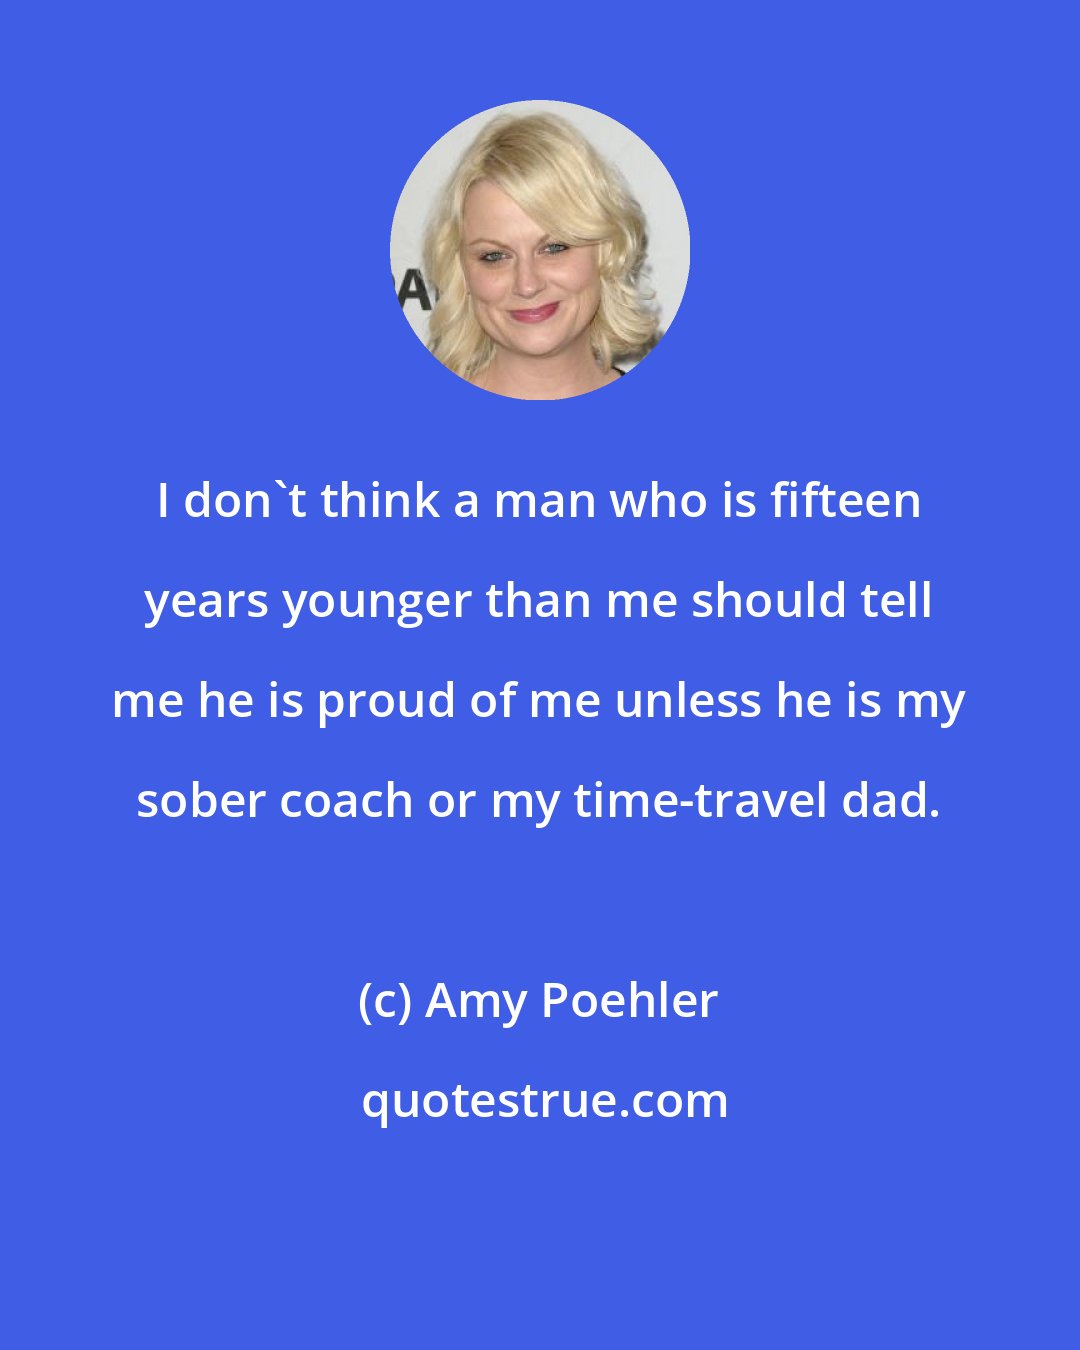 Amy Poehler: I don't think a man who is fifteen years younger than me should tell me he is proud of me unless he is my sober coach or my time-travel dad.